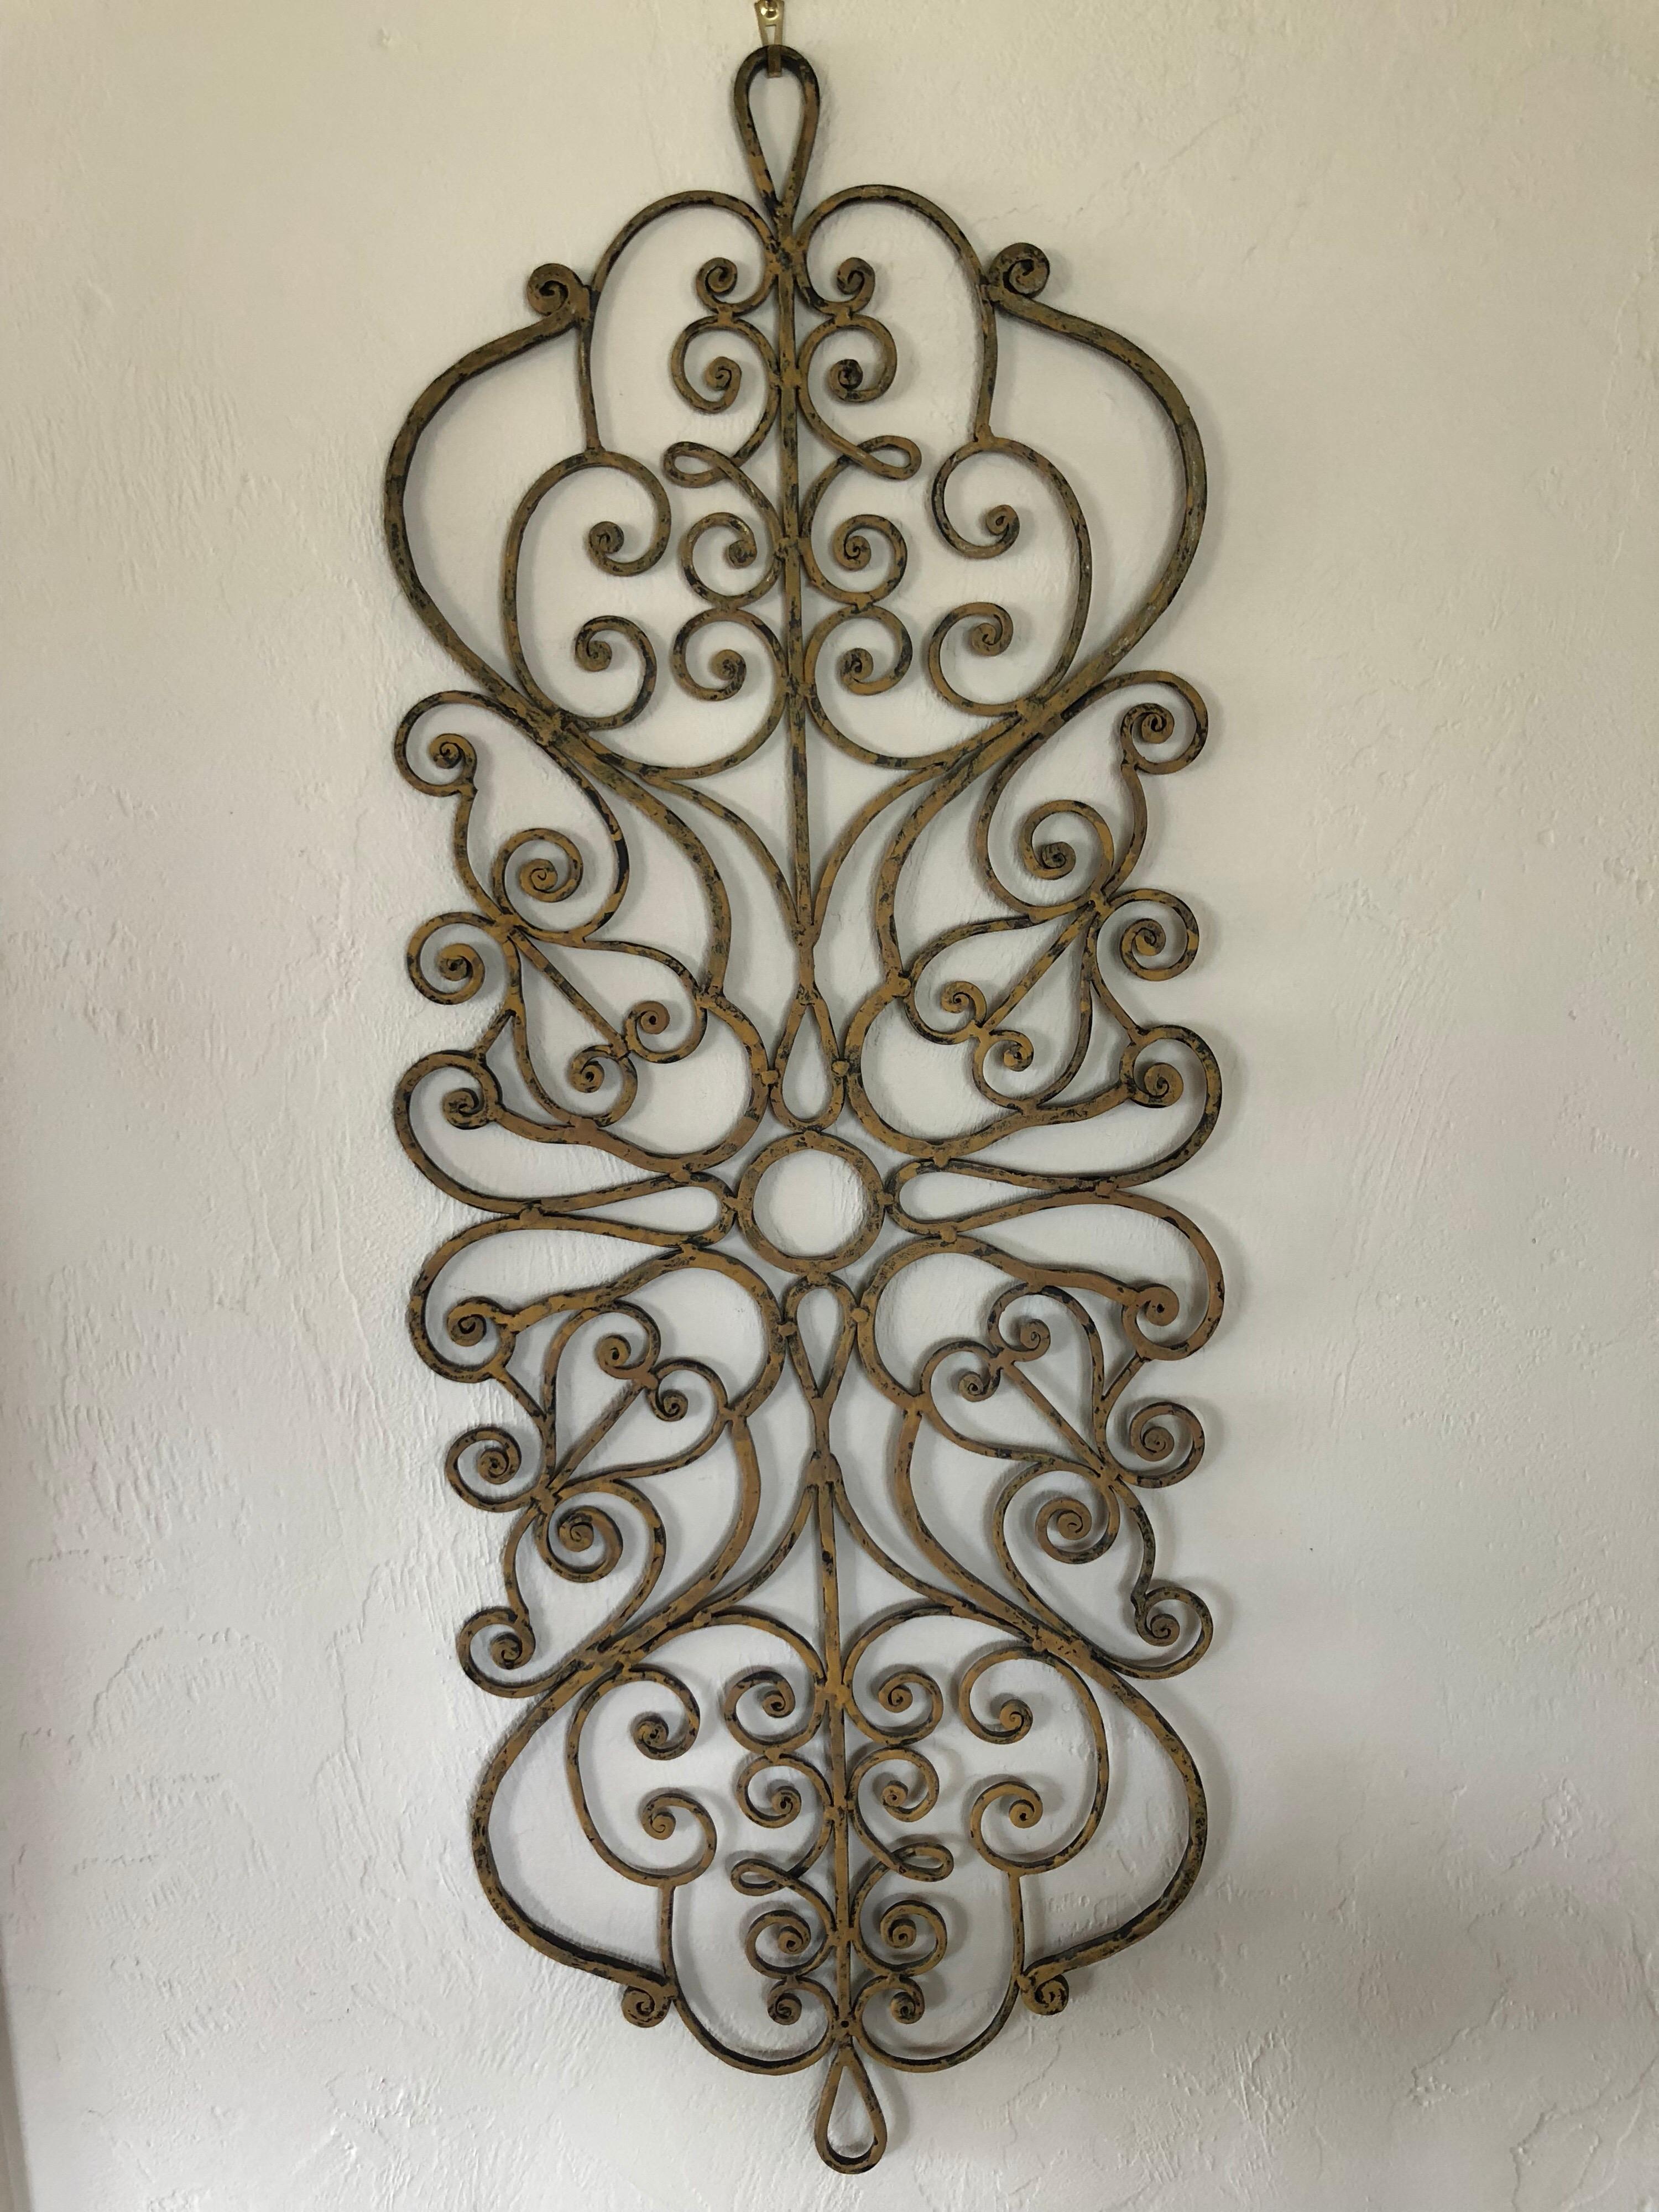 Large Hand-Wrought Iron Wall Sculpture 15